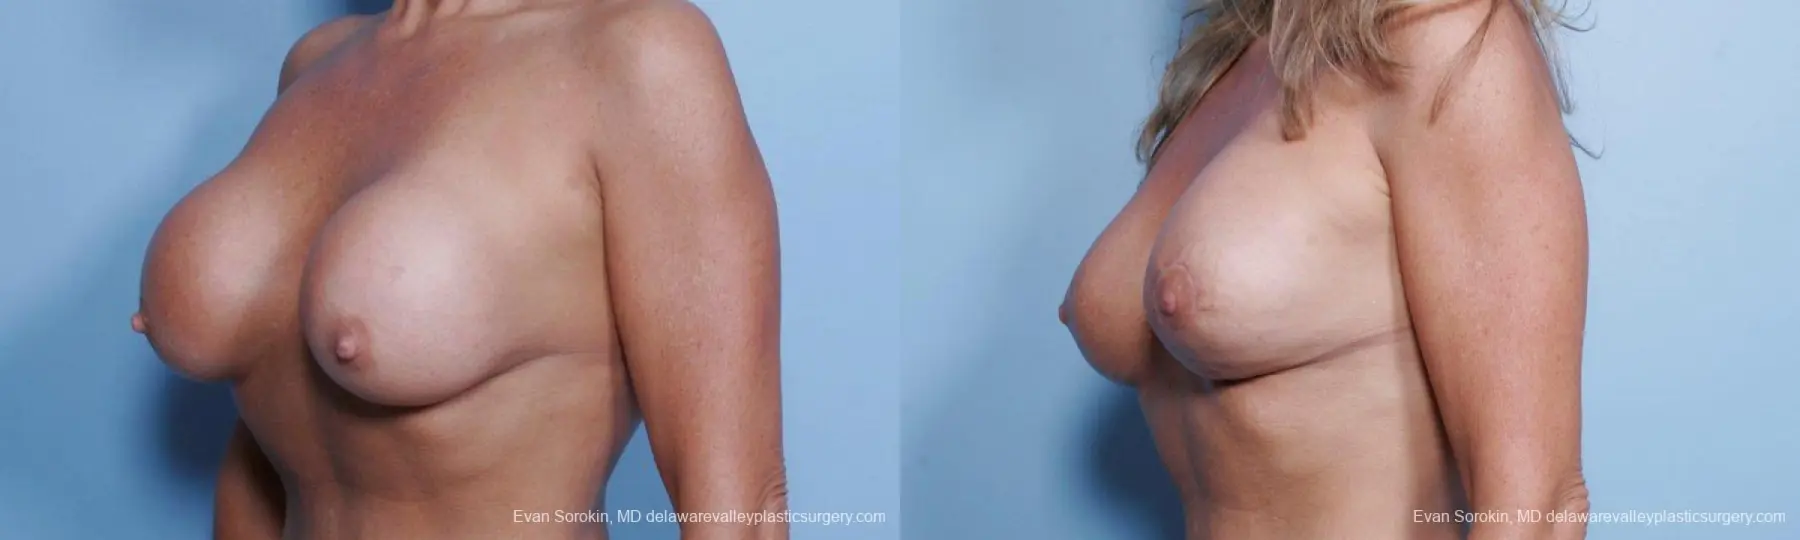 Philadelphia Breast Lift and Augmentation 9453 - Before and After 3